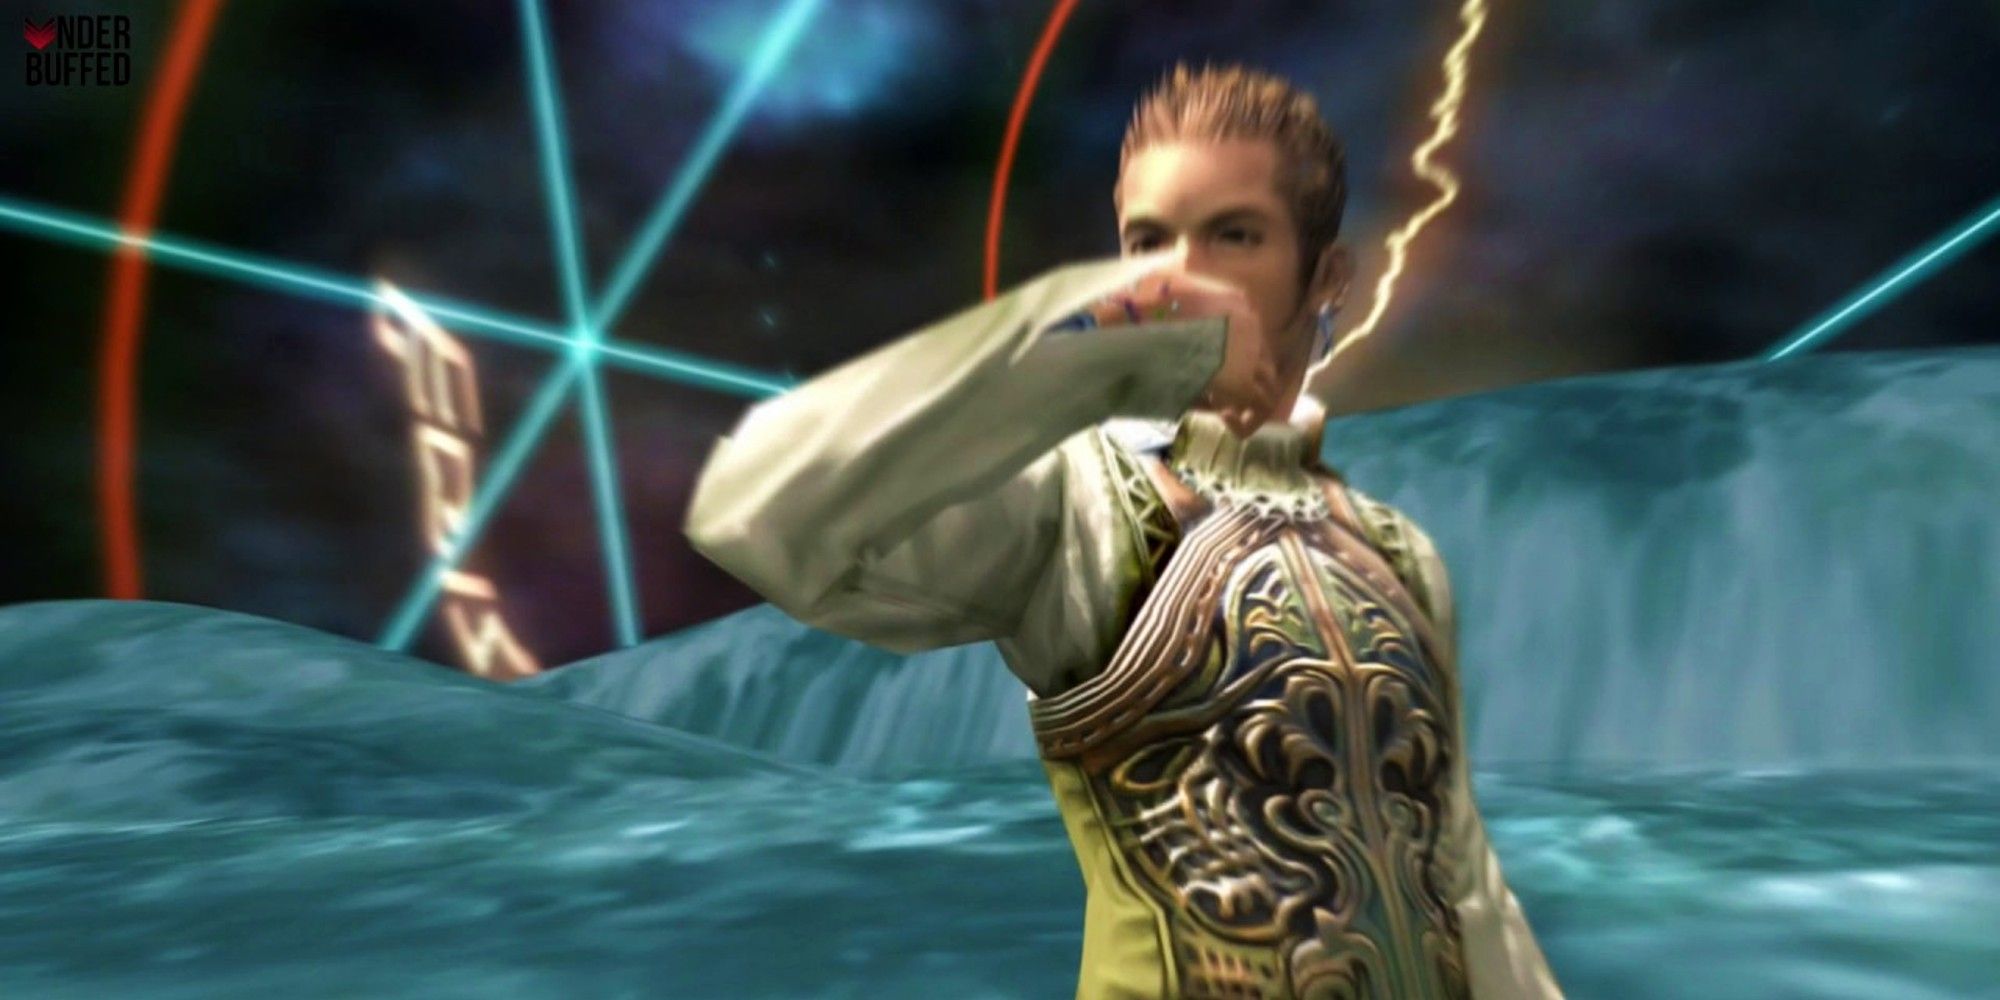 Balthier prepares to attack in style